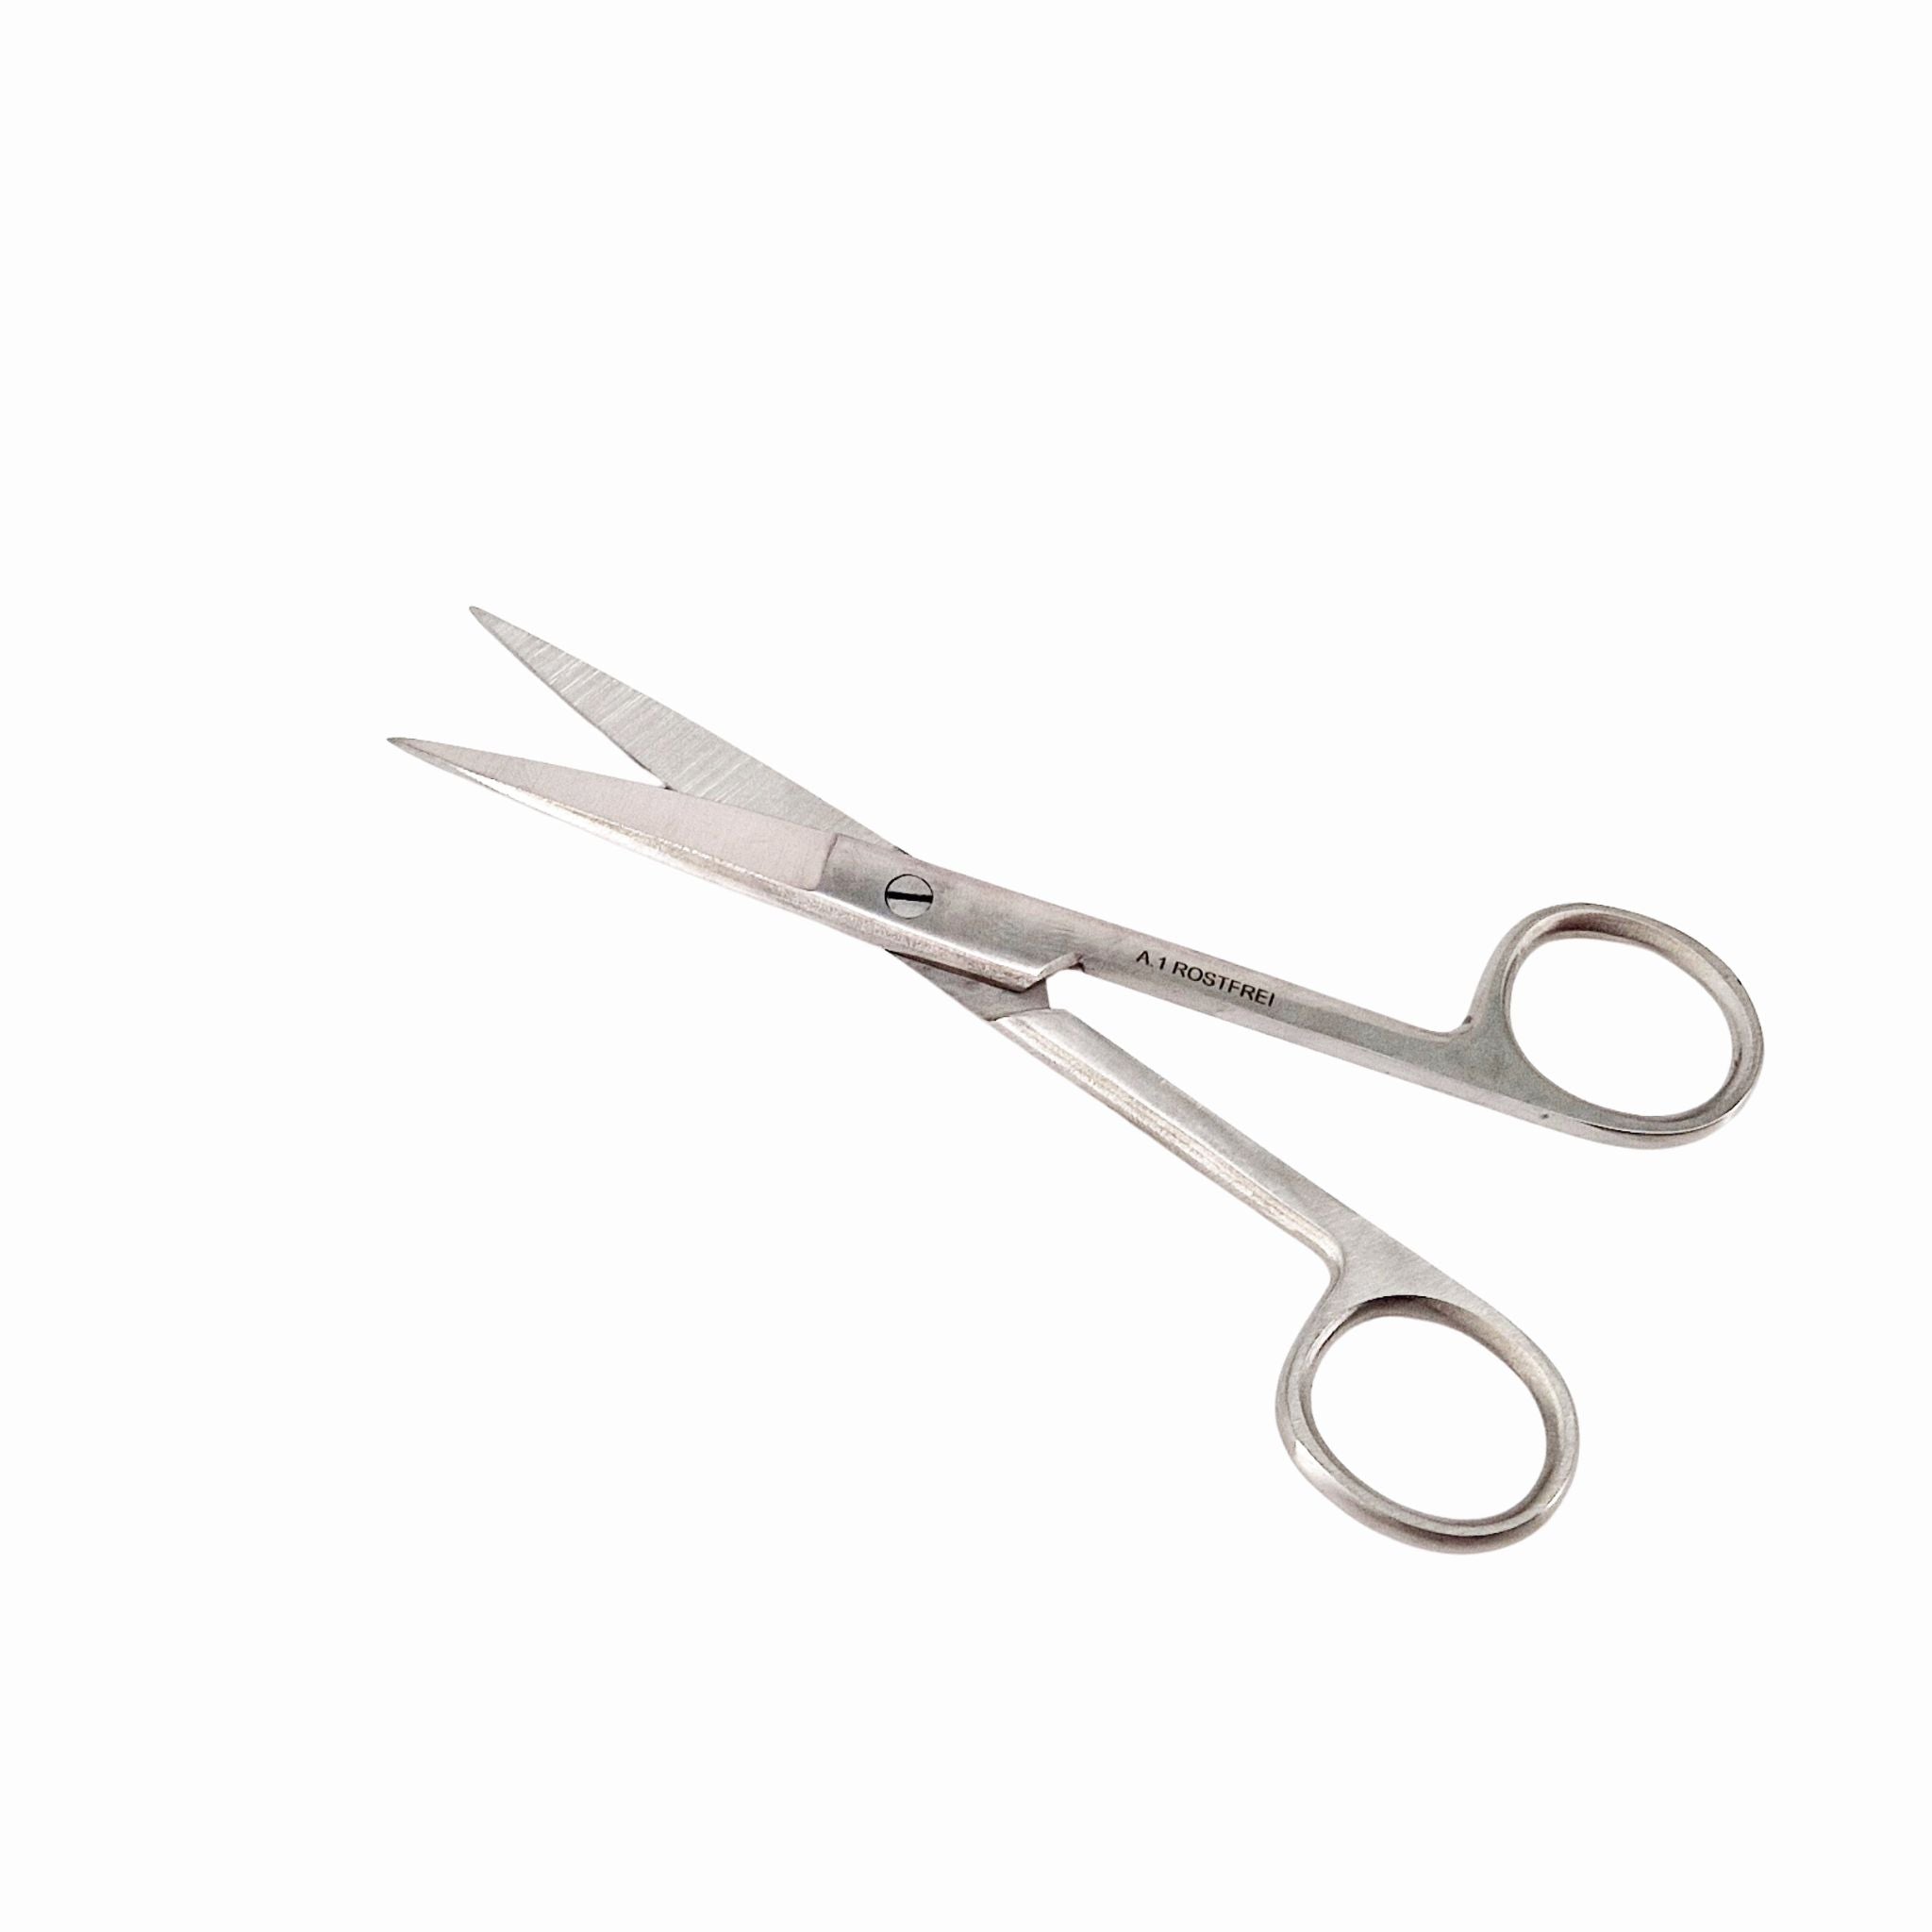 Lavabis surgical scissors straight stainless steel - 0